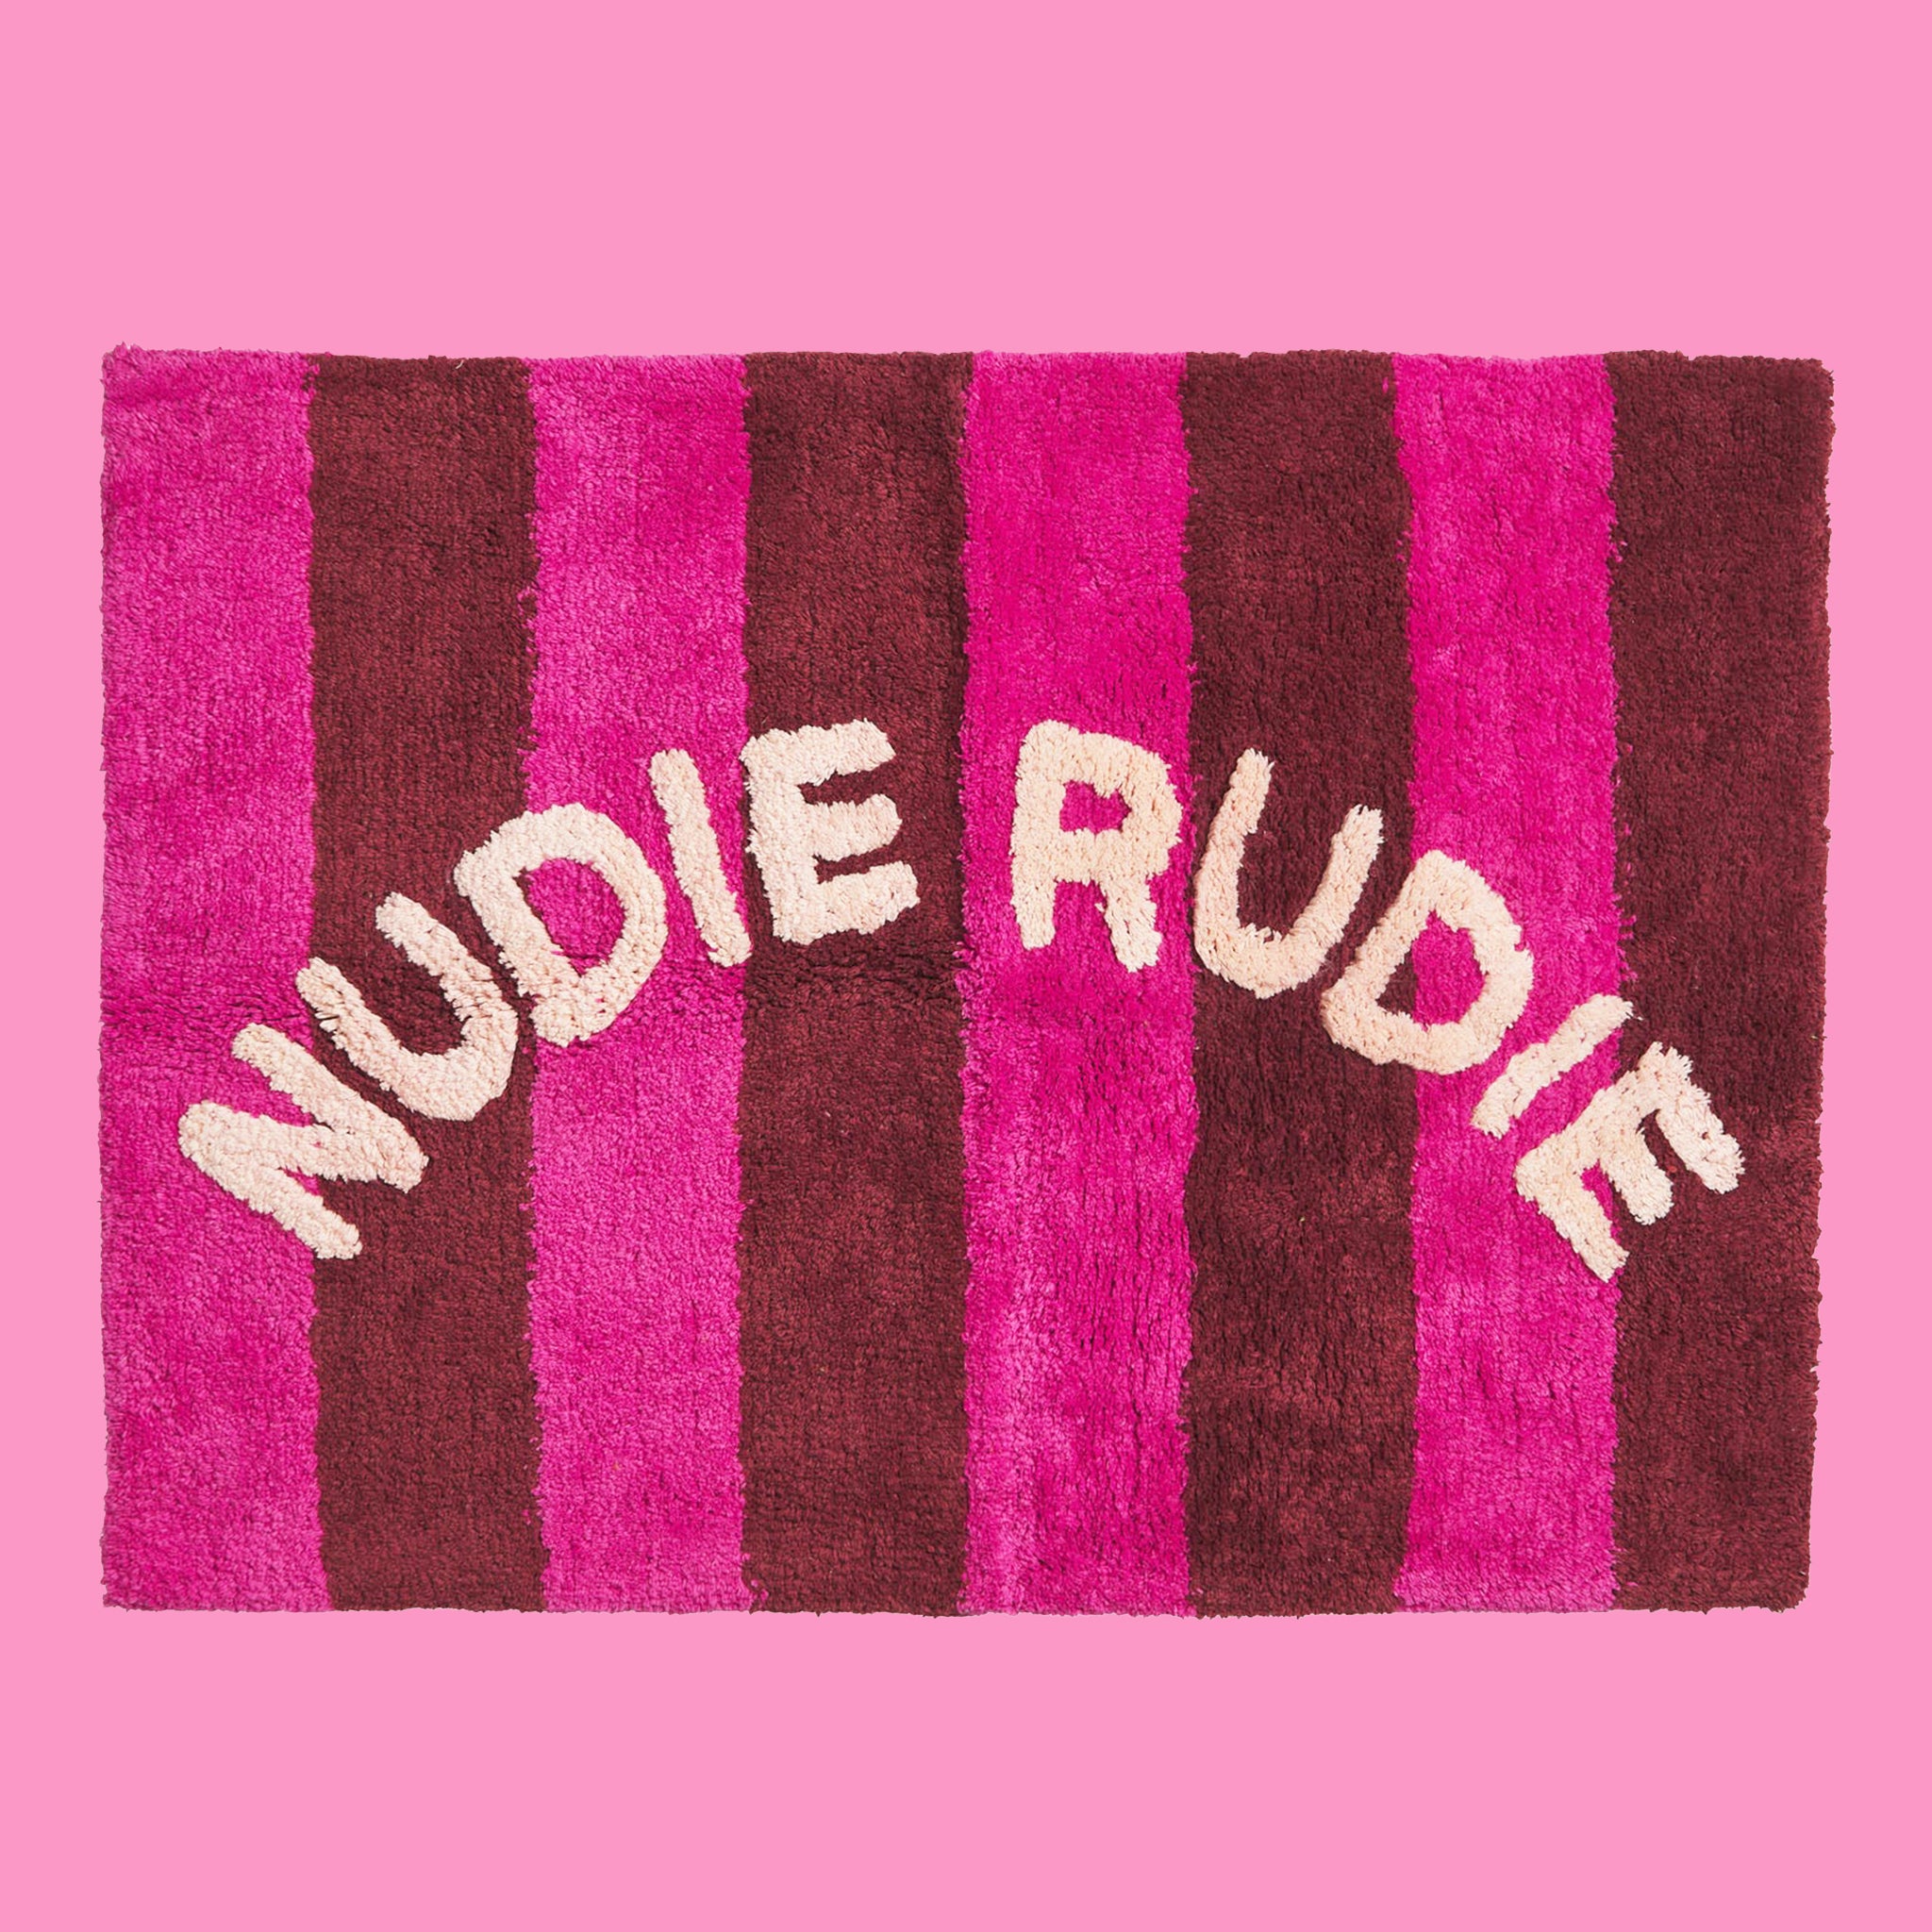 A hot pink and burgundy striped bath mat with white text arched in the center that reads, "Nudie Rudie". 